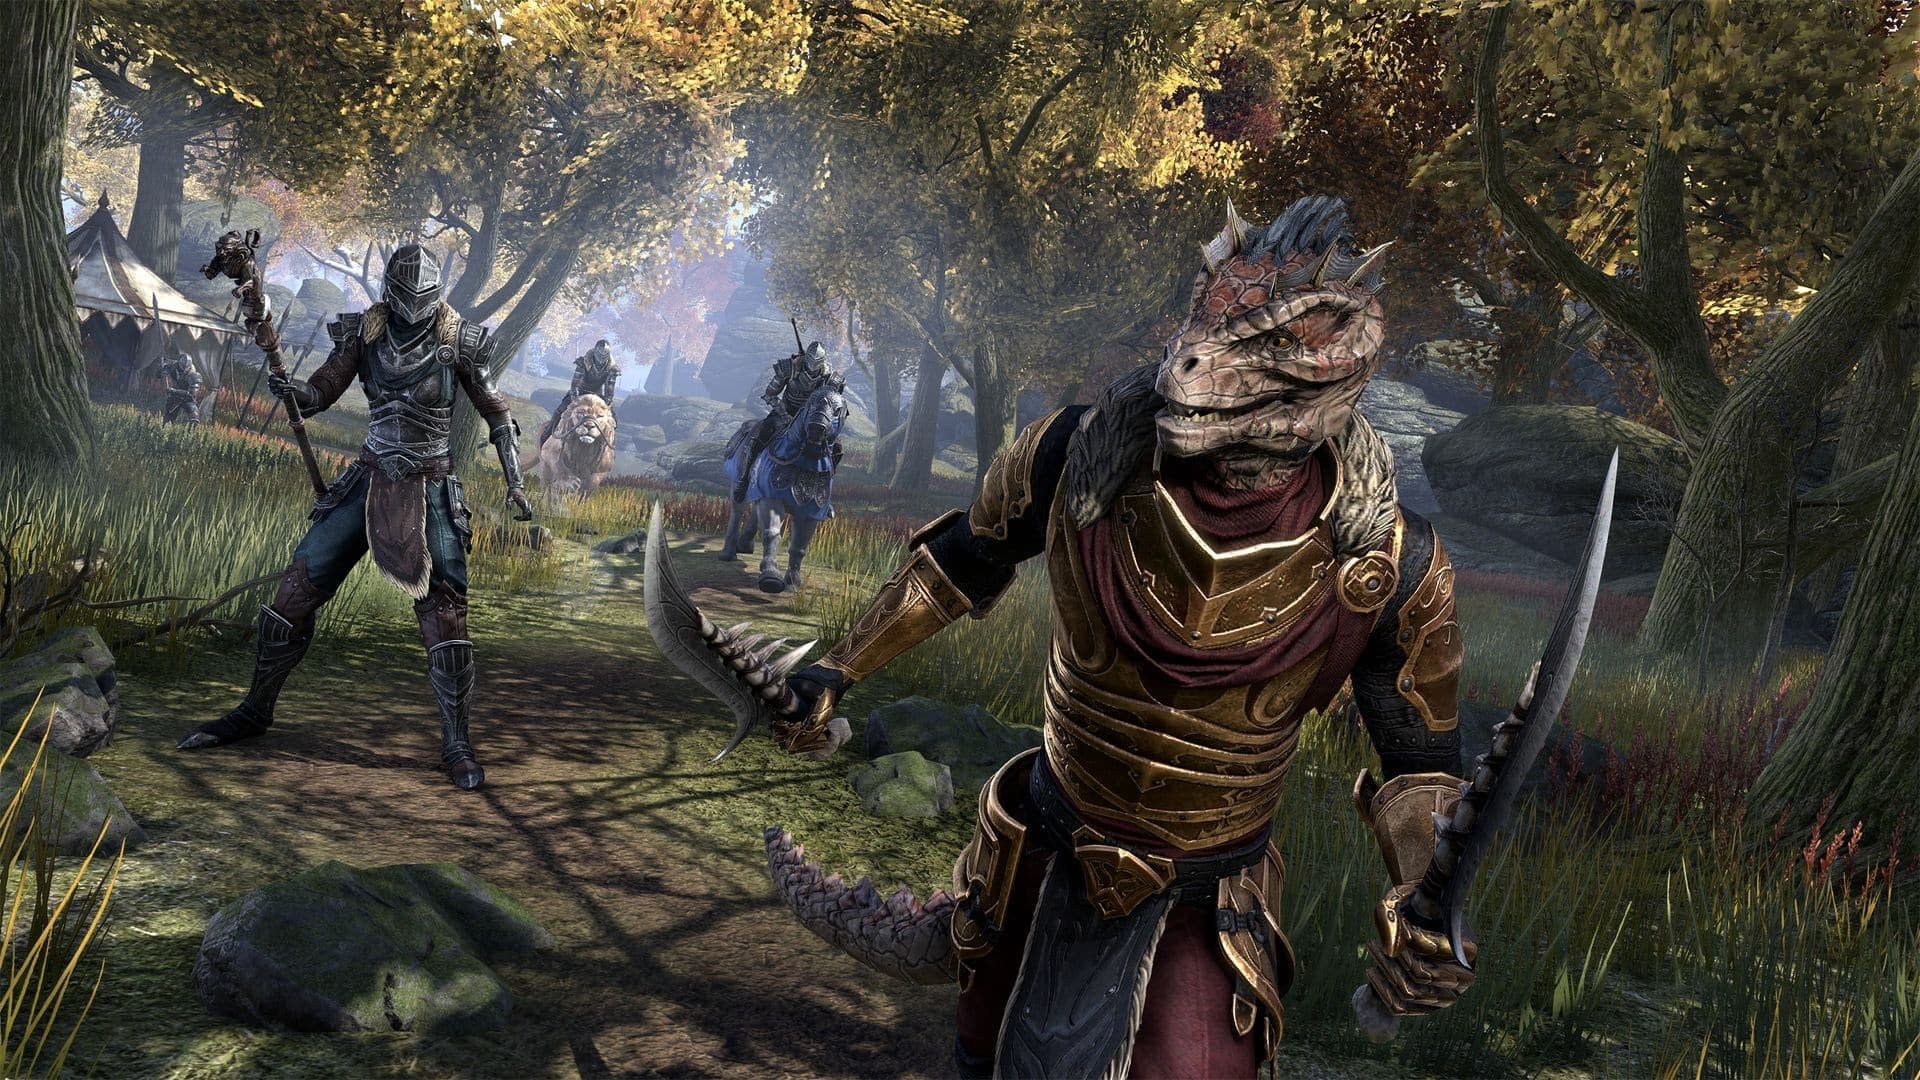 ESO 39. Update Now in Consoles: Includes Expected Play Improvements For Long Time